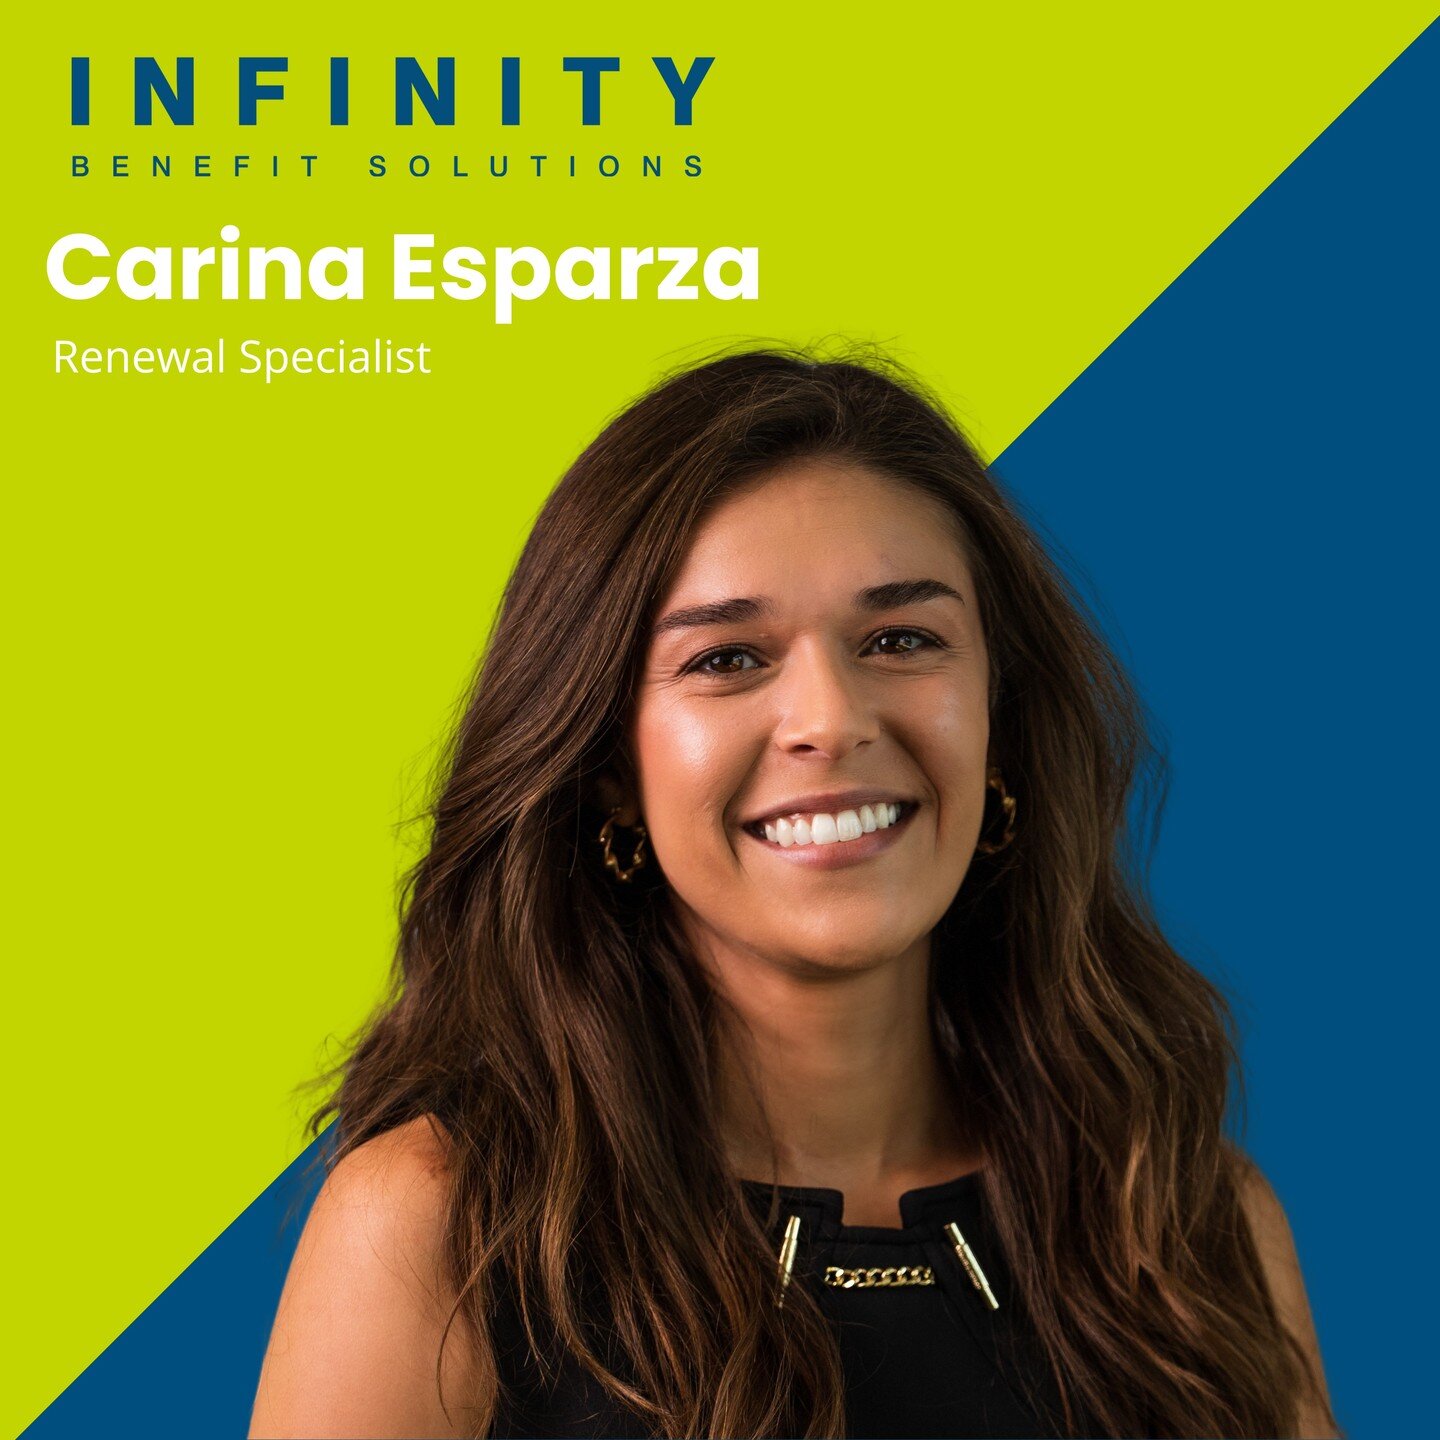 Please help us welcome Carina Esparza, our new renewal specialist at Infinity Benefit Solutions, Inc.! She previously worked as a Bilingual/ESL Elementary Educator in the public and private sectors for over six years. Her favorite thing about IBSI is